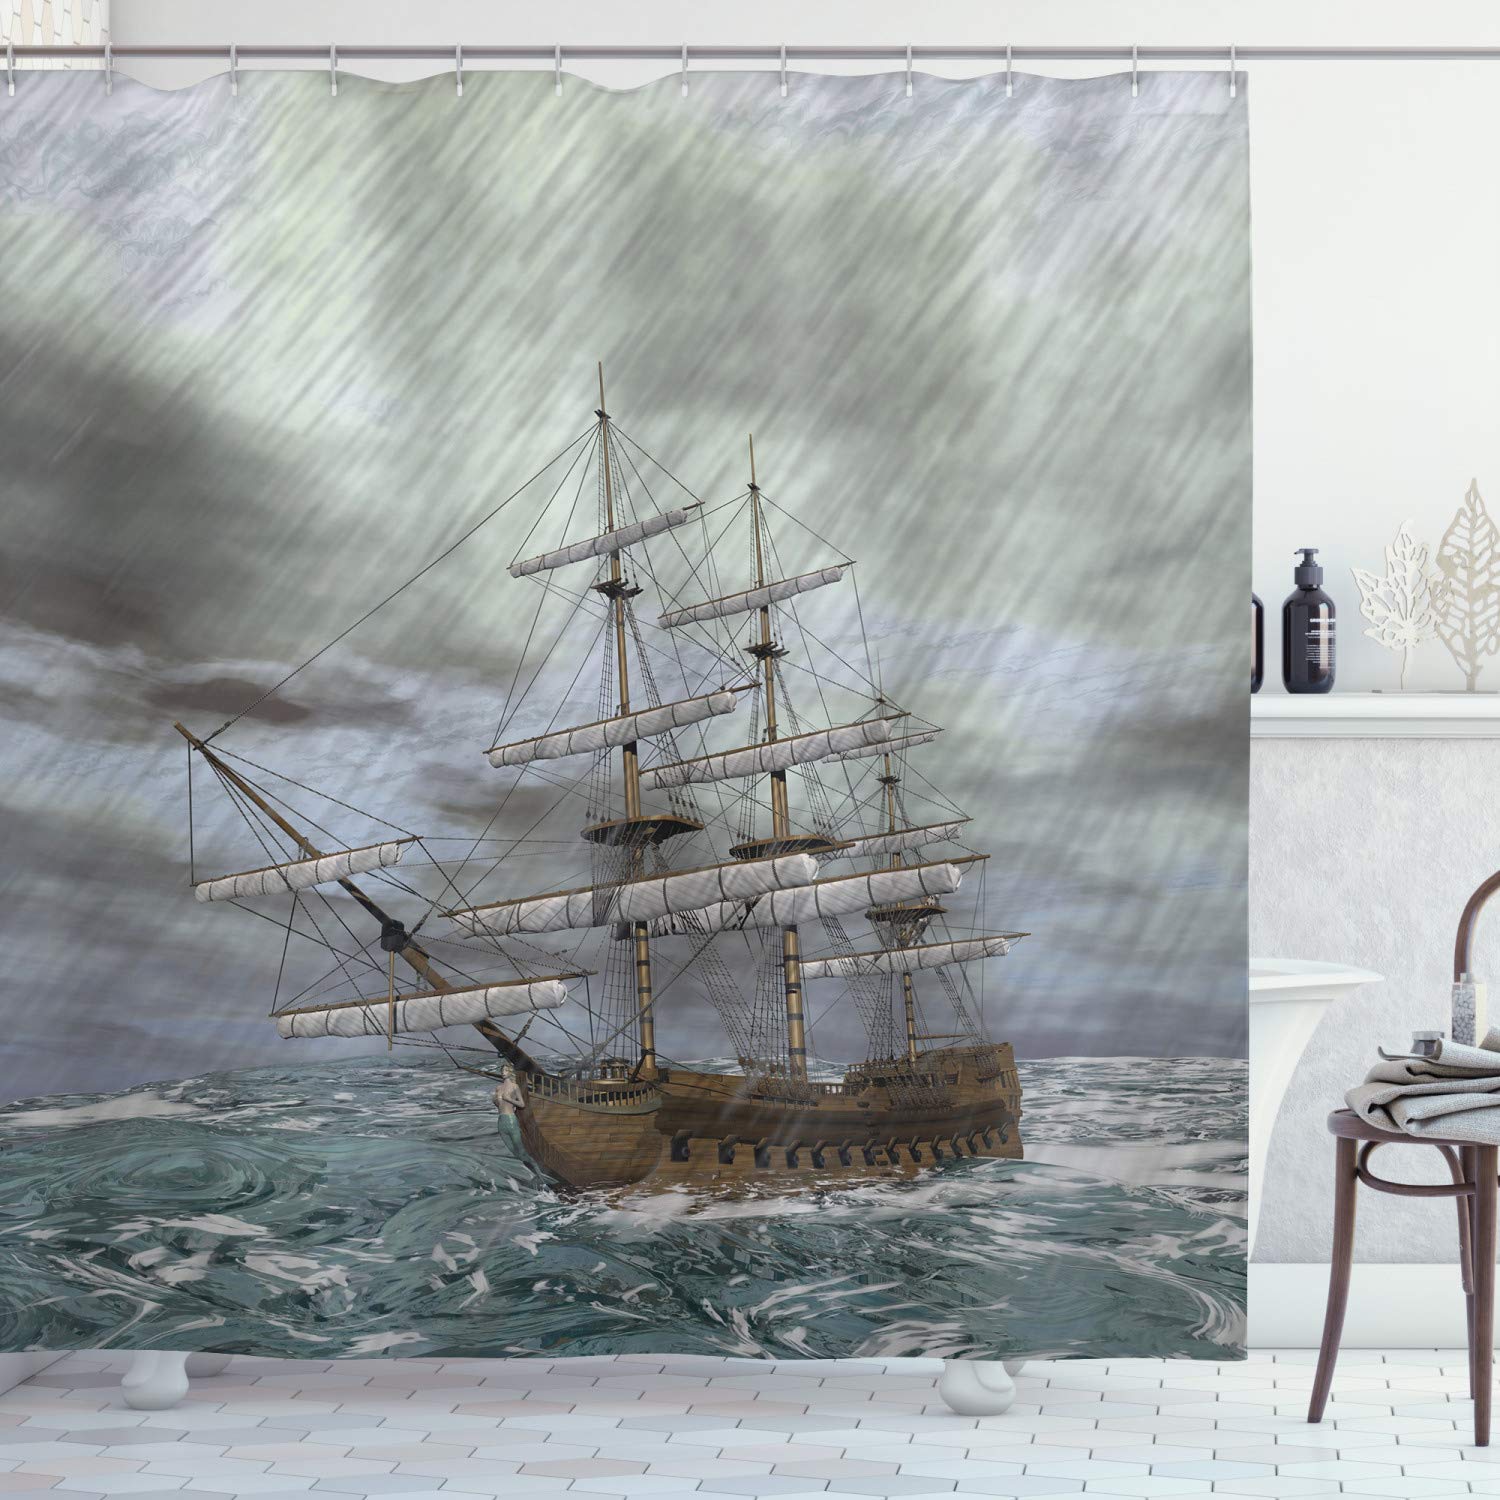 Ambesonne Nautical Shower Curtain, Old Ship on The Ocean in Wave Rainy Stormy Weather Fantasy Illustration, Cloth Fabric Bathroom Decor Set with Hooks, 70" Long, Grey Blue